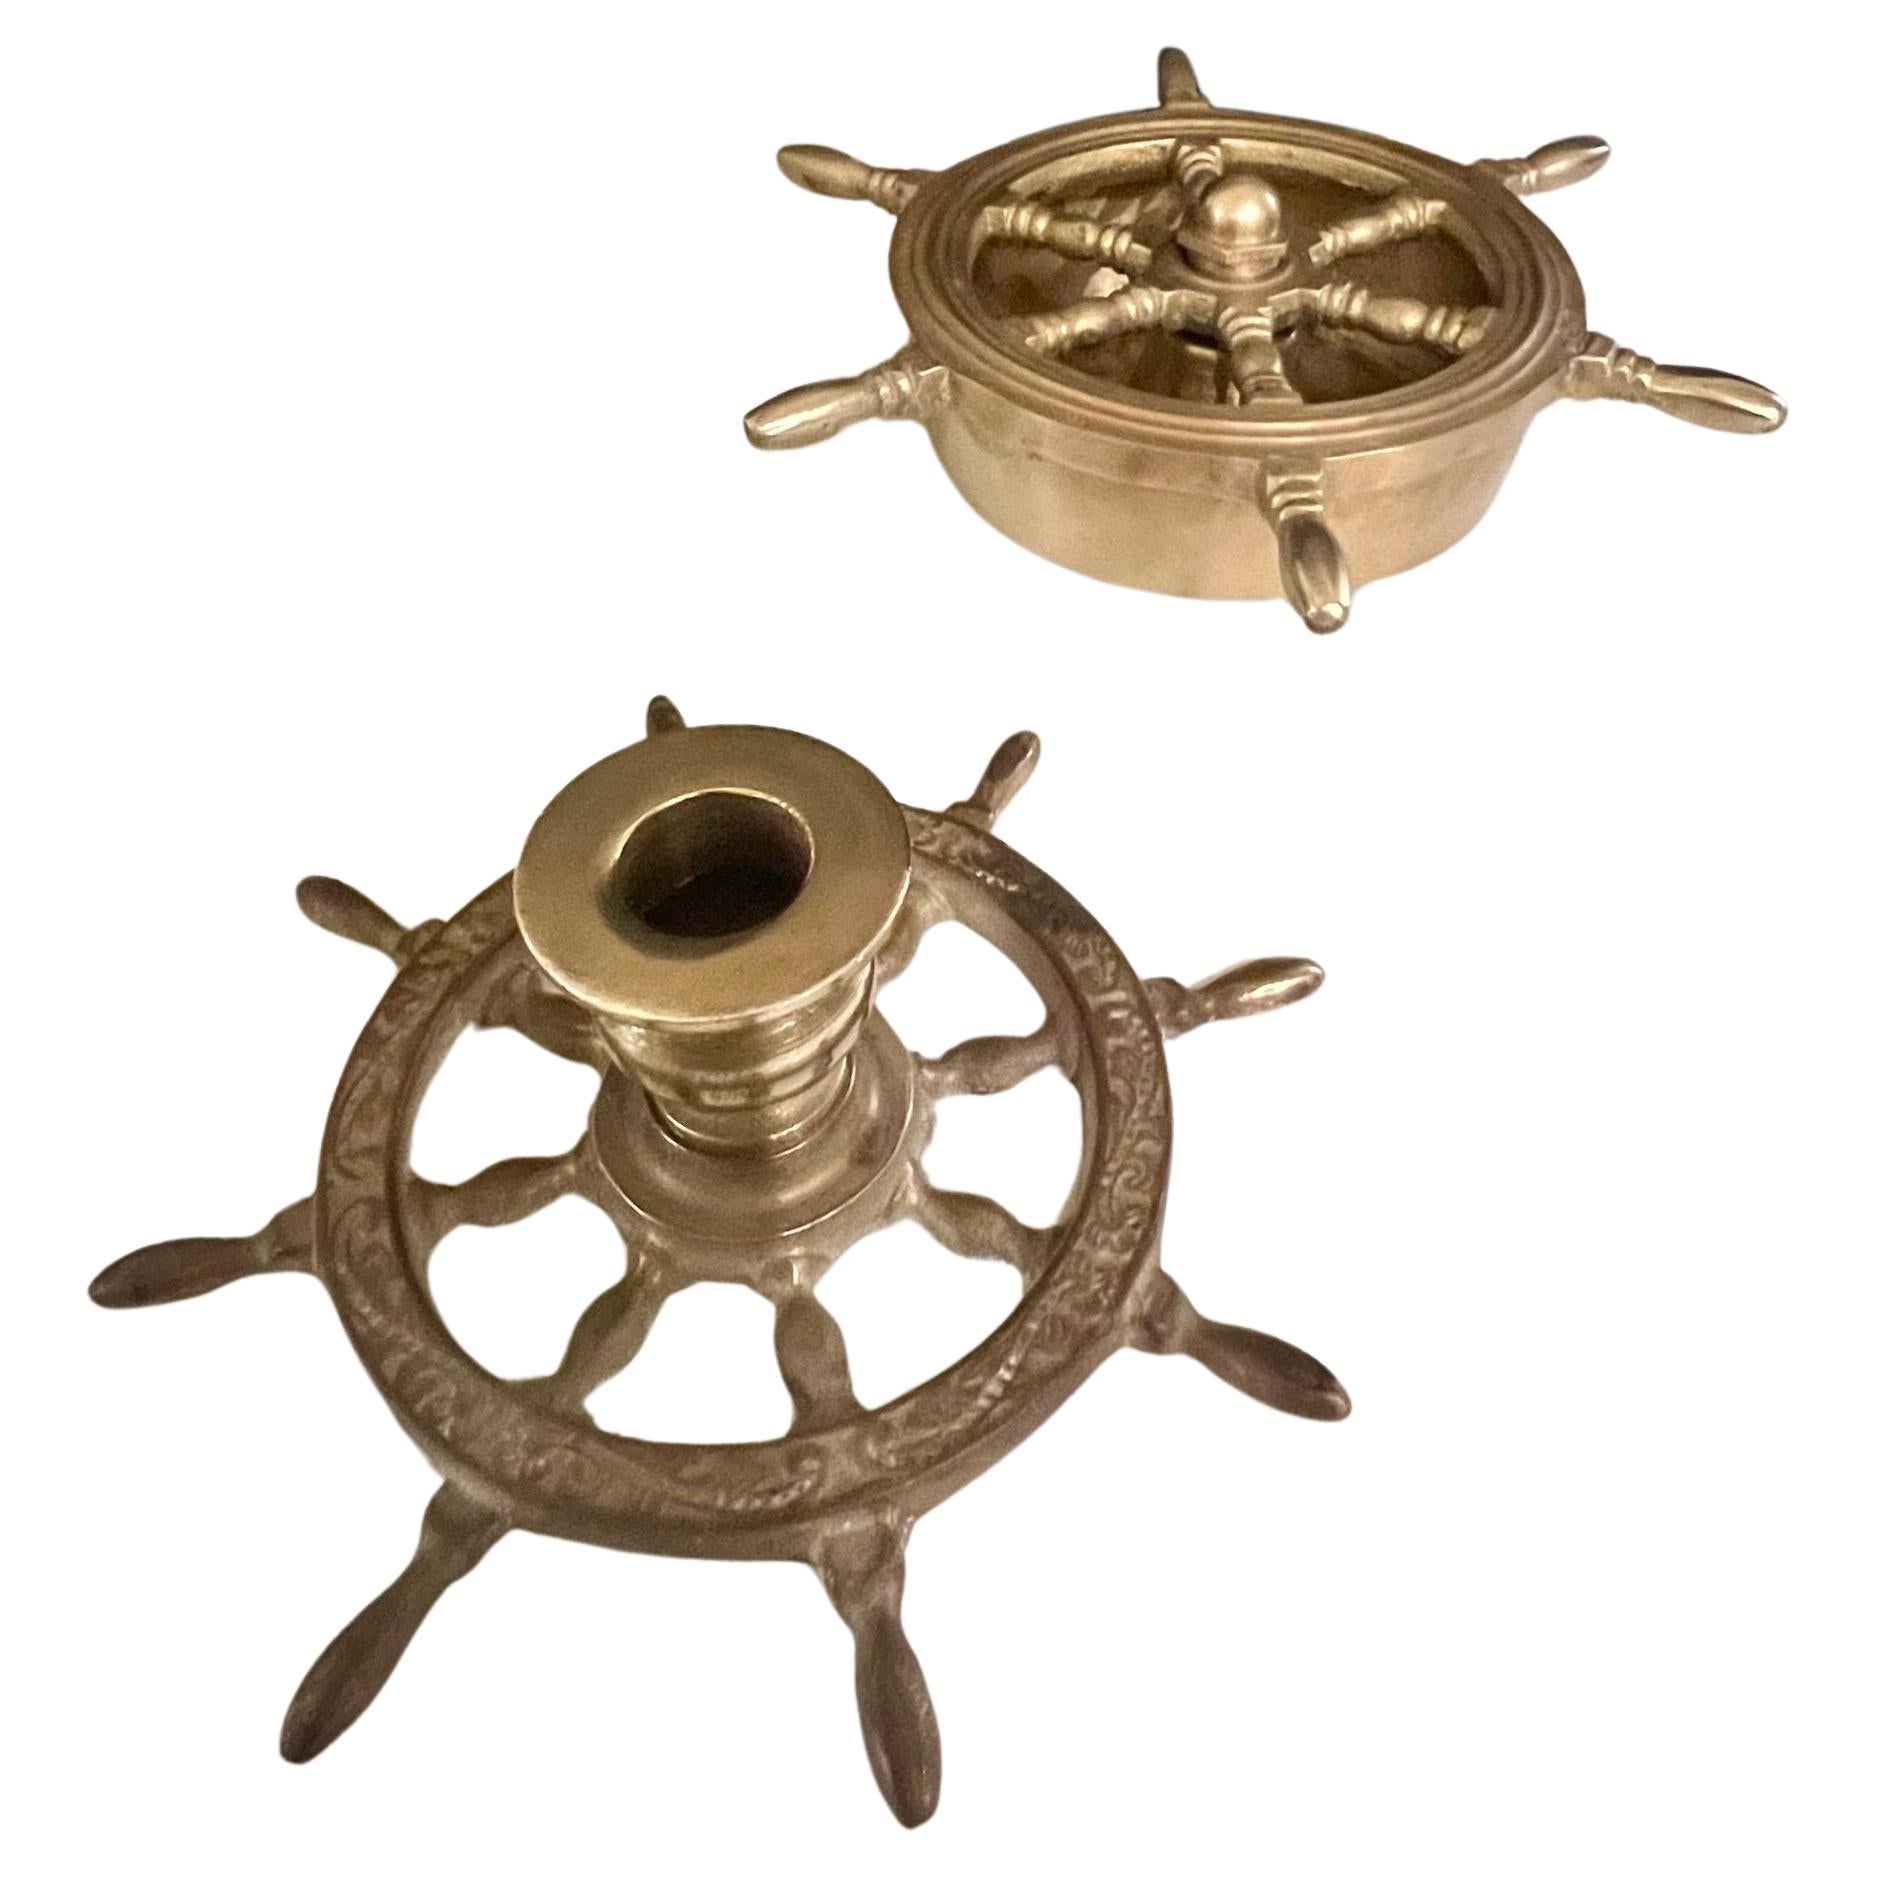 20th Century Whimsical Solid Brass Nautical Candle Holder & Ashtray Steering Wheel For Sale